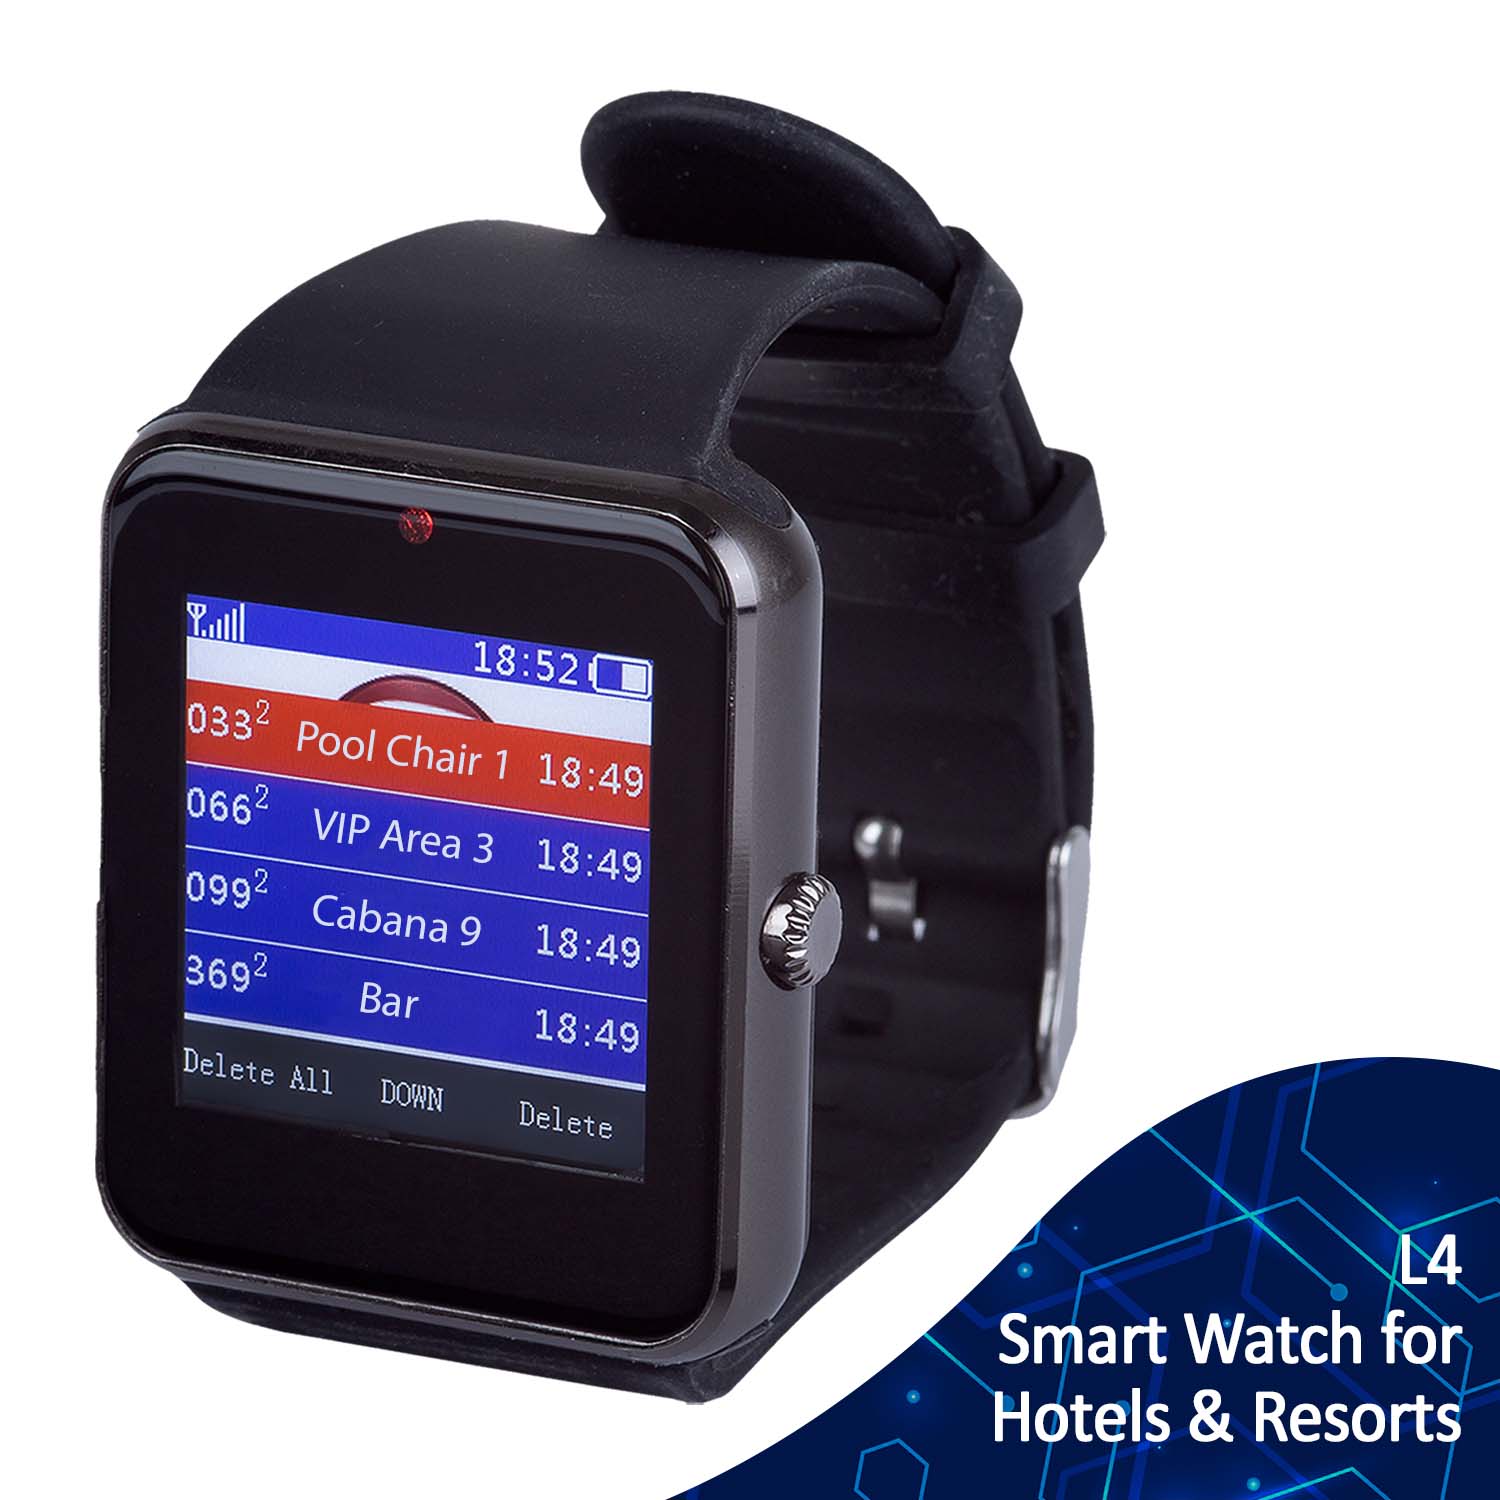 Wireless Receiver Pager in format of a smart watch showing customizable calls for hotels & resorts